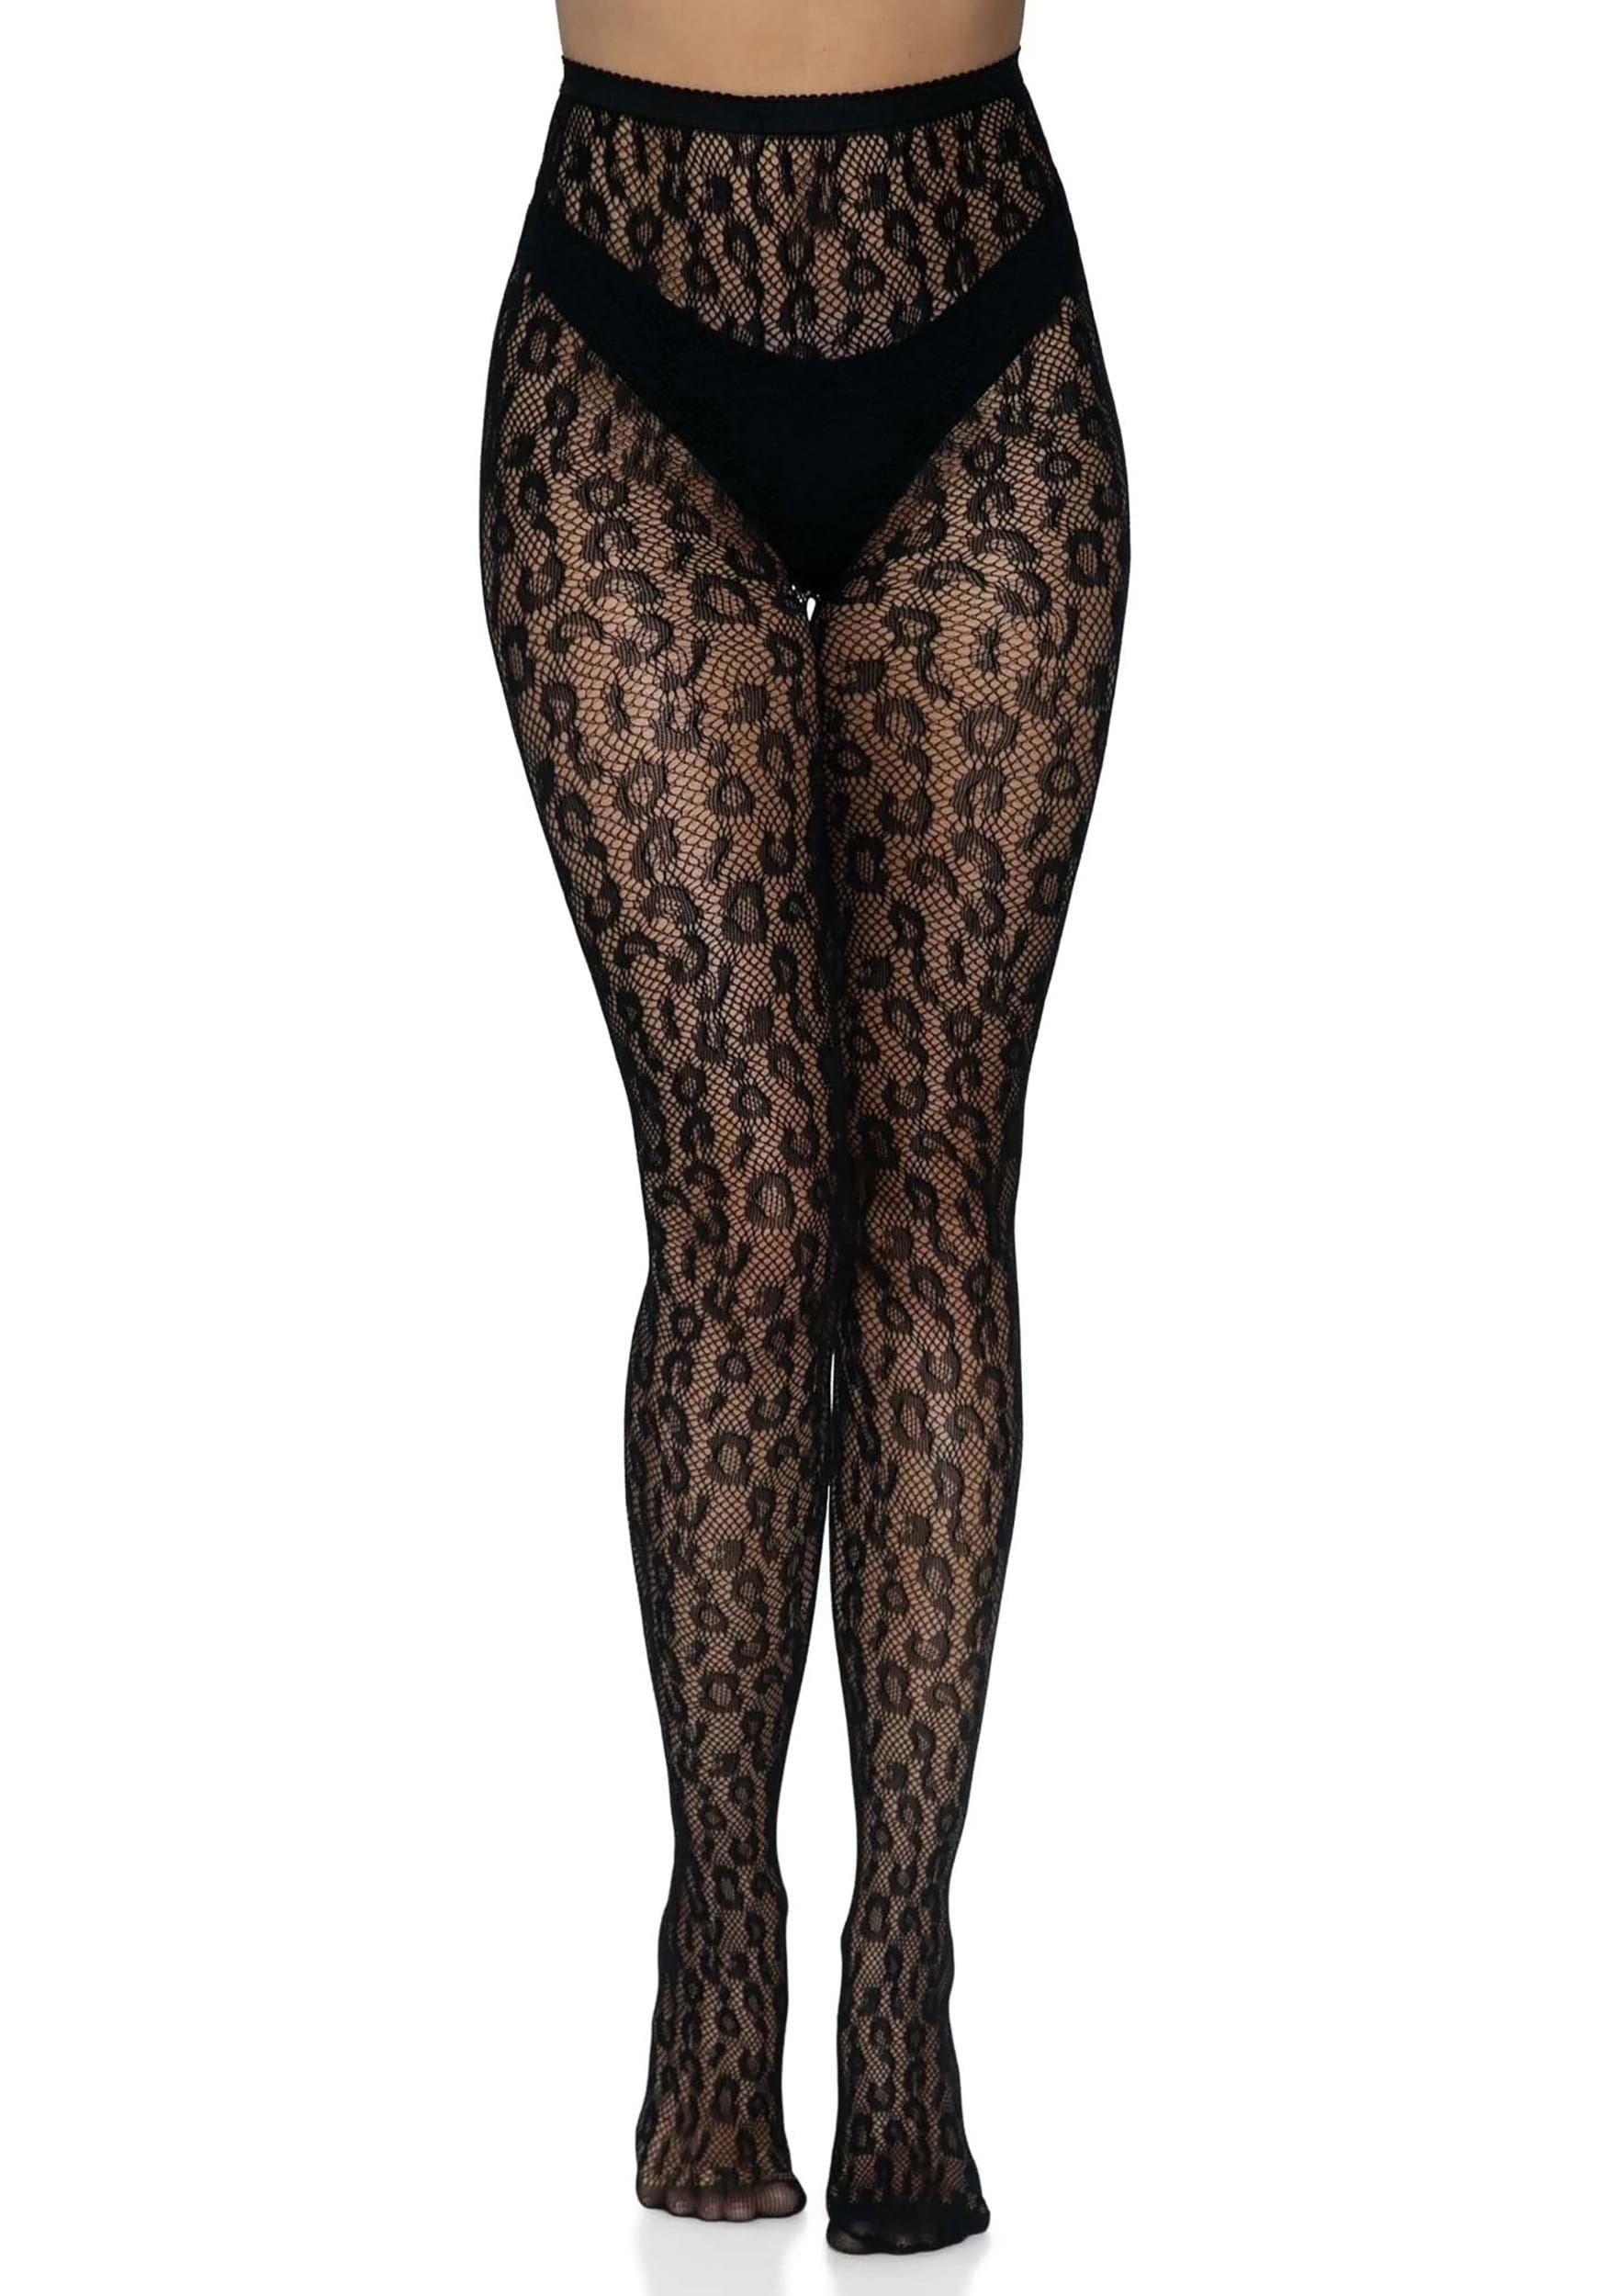 Black Lace Net Tights, Accessories